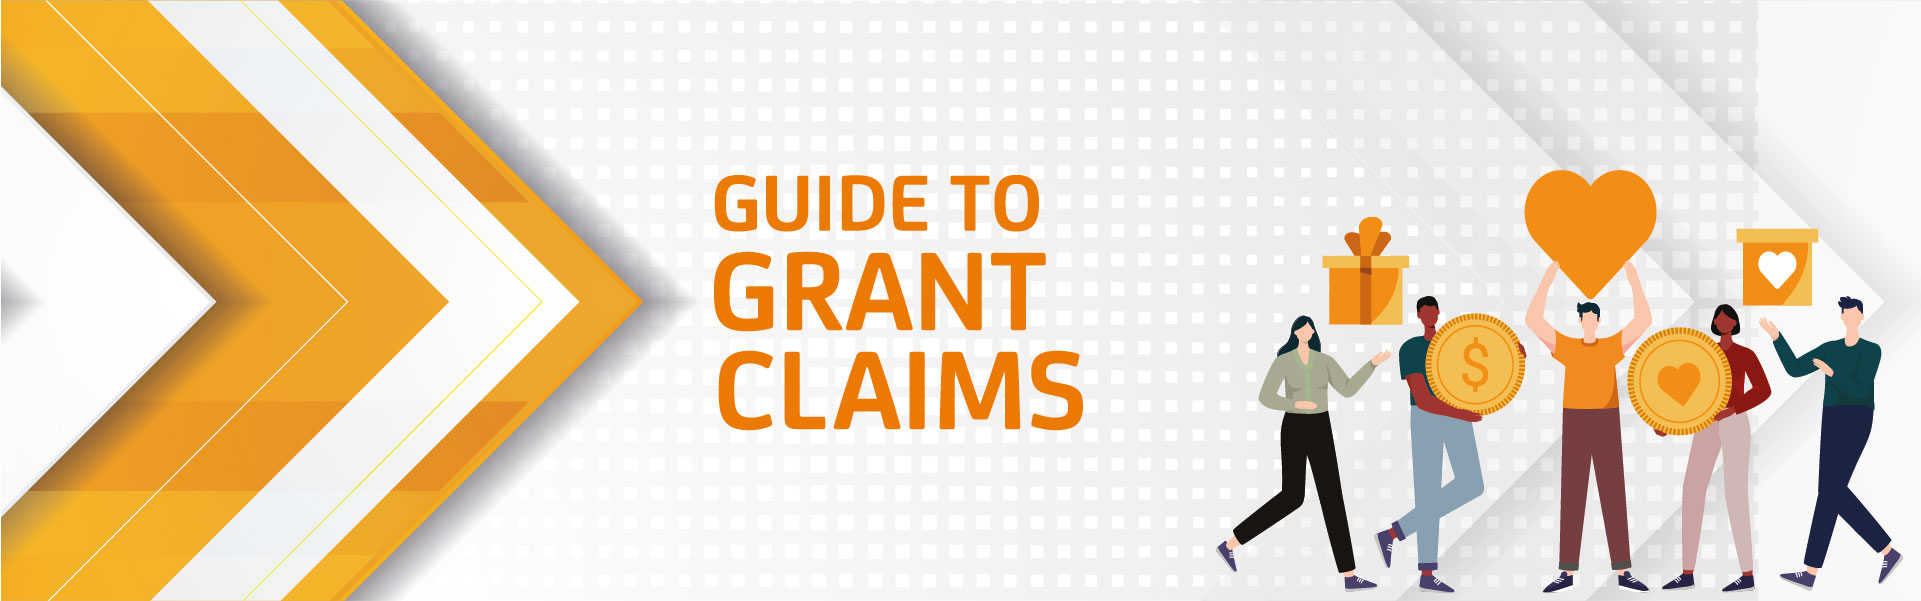 Guide to Grant Claims